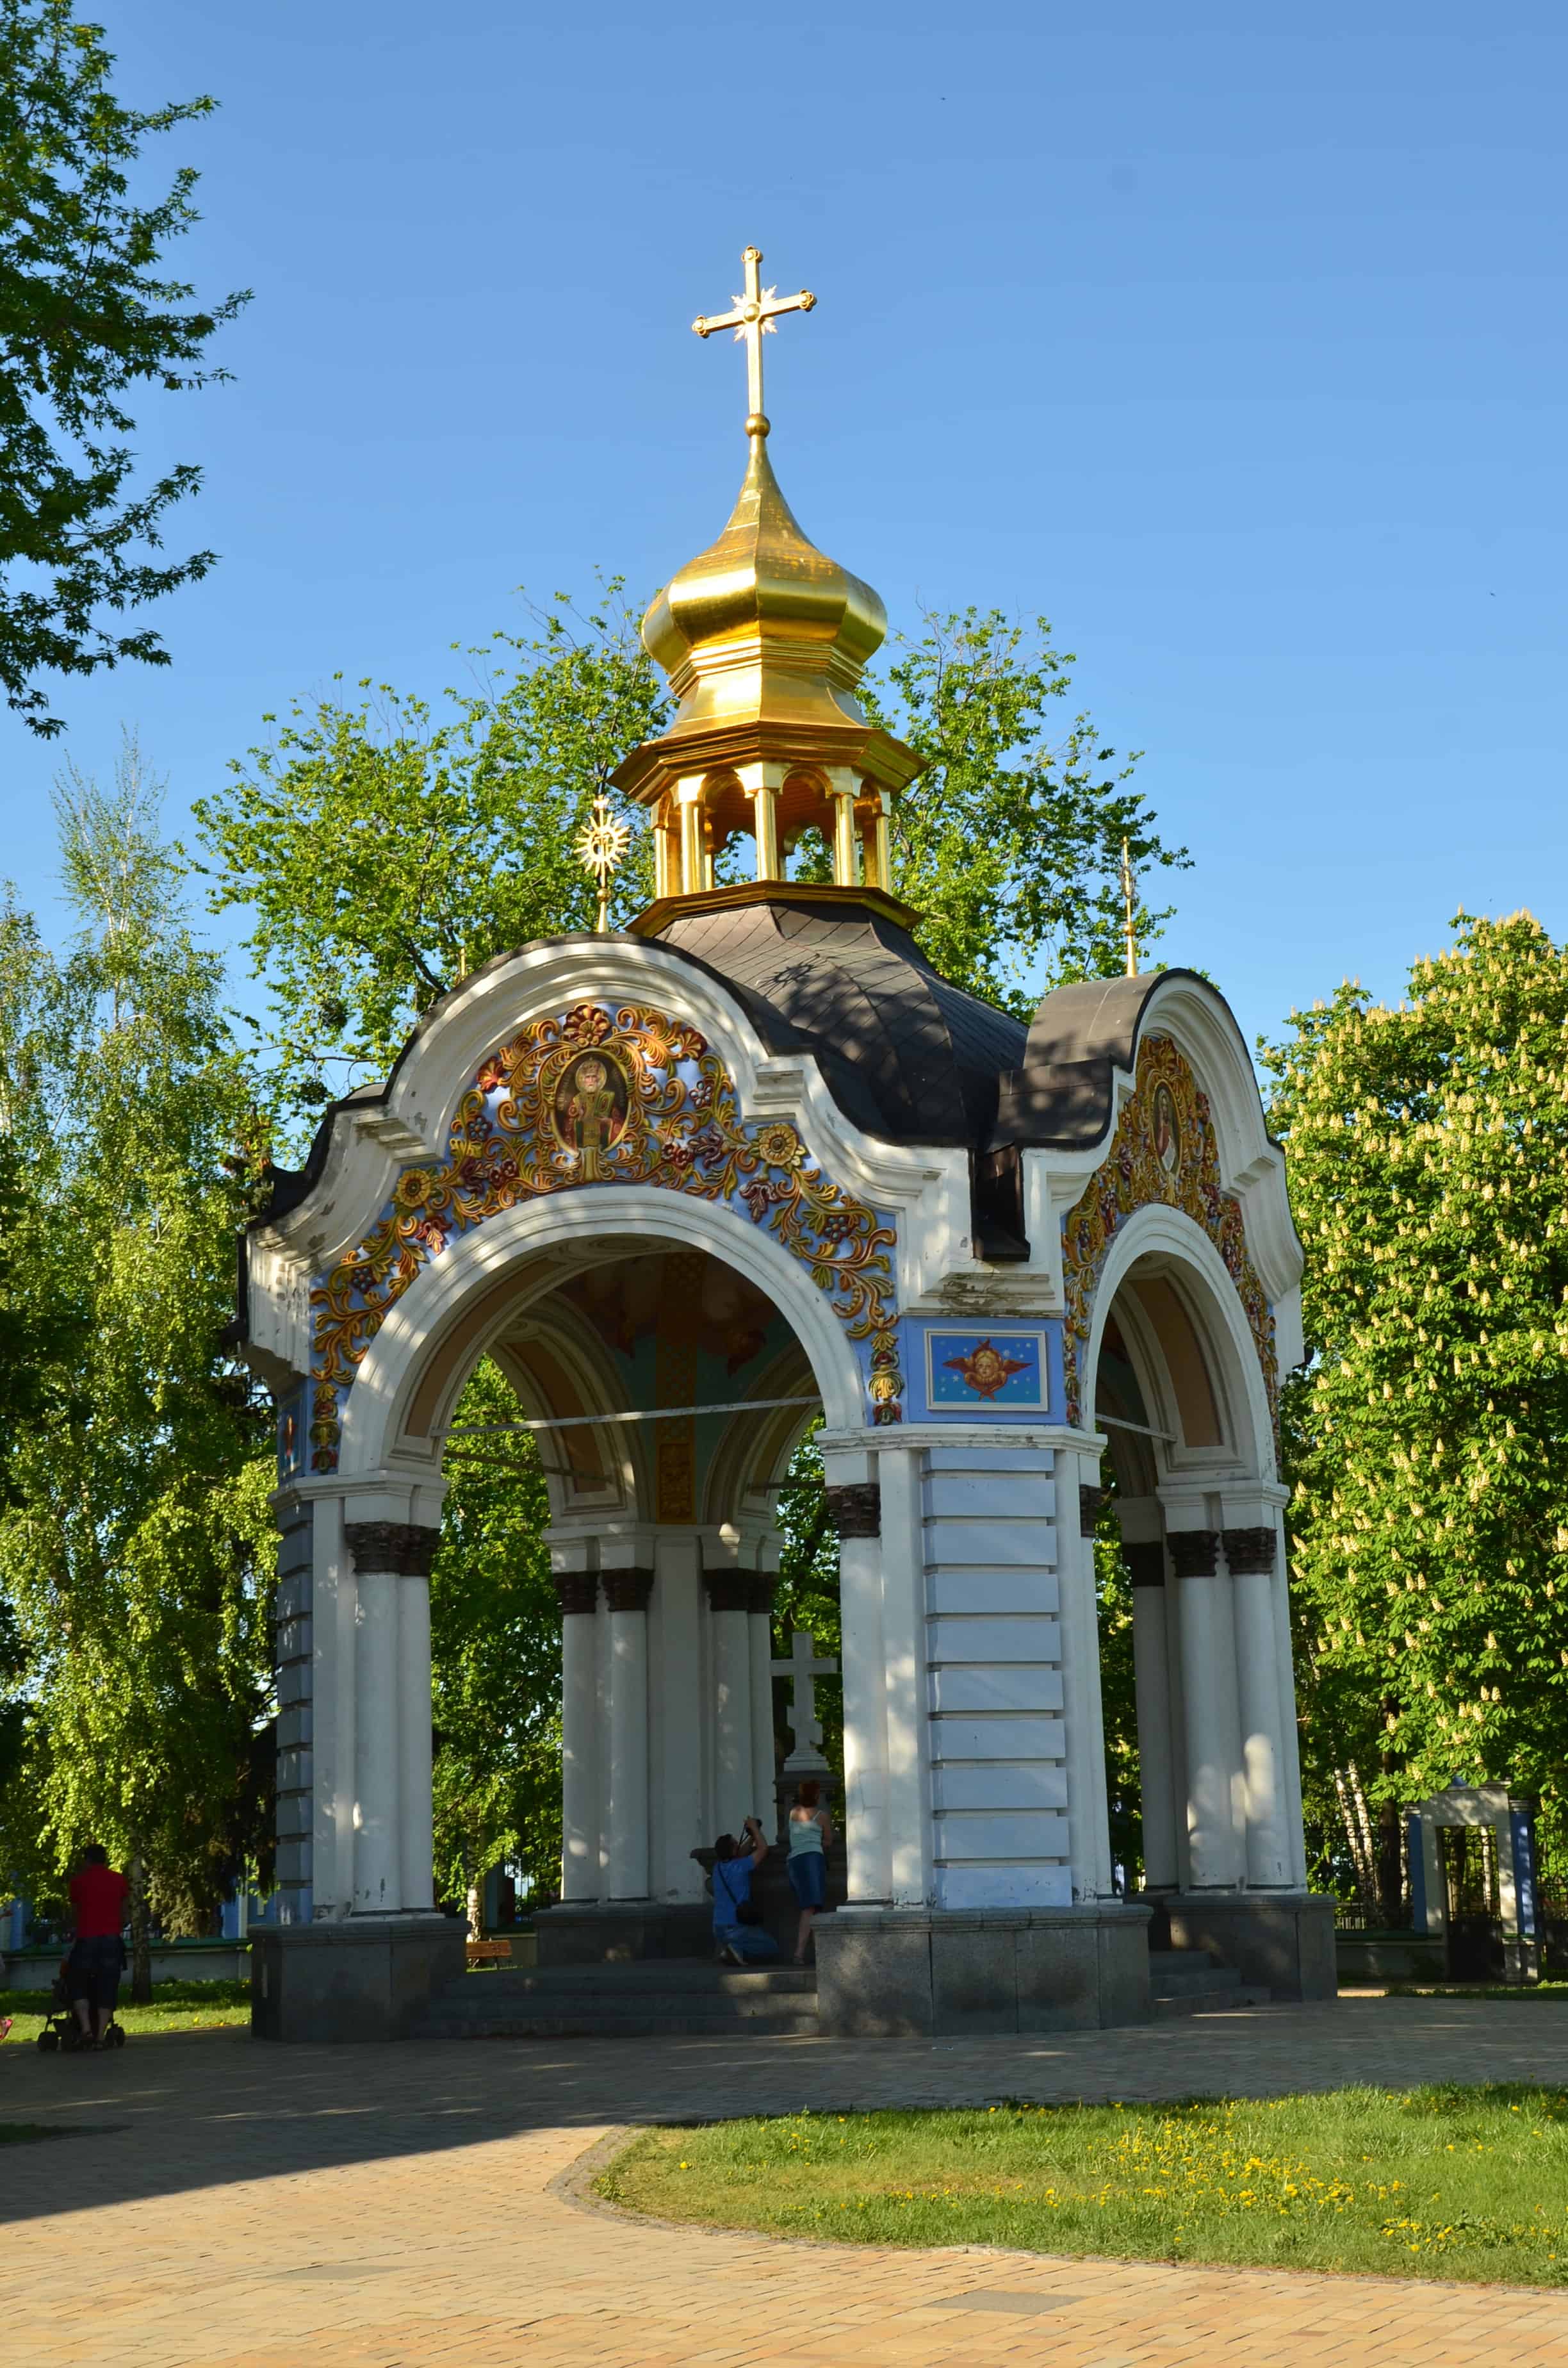 Fountain at St. Michael's Golden-Domed Monastery in Kyiv, Ukraine